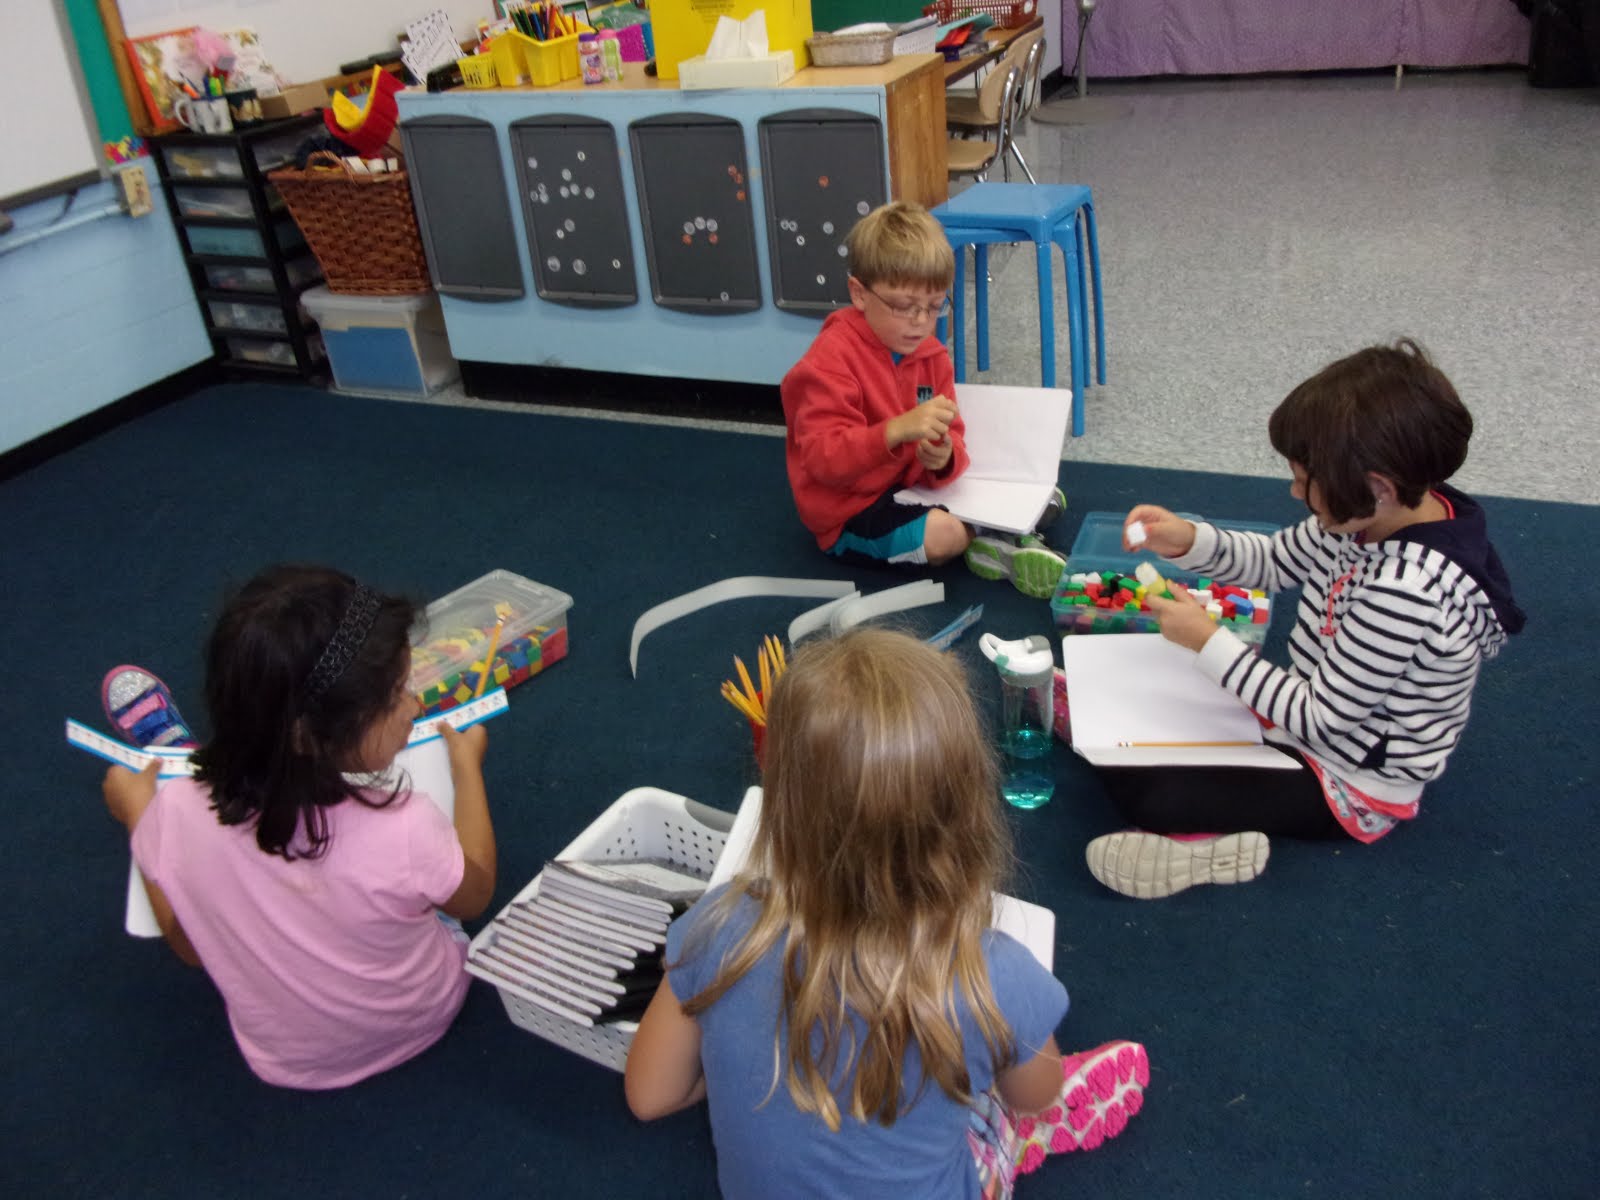 Working In Small Groups